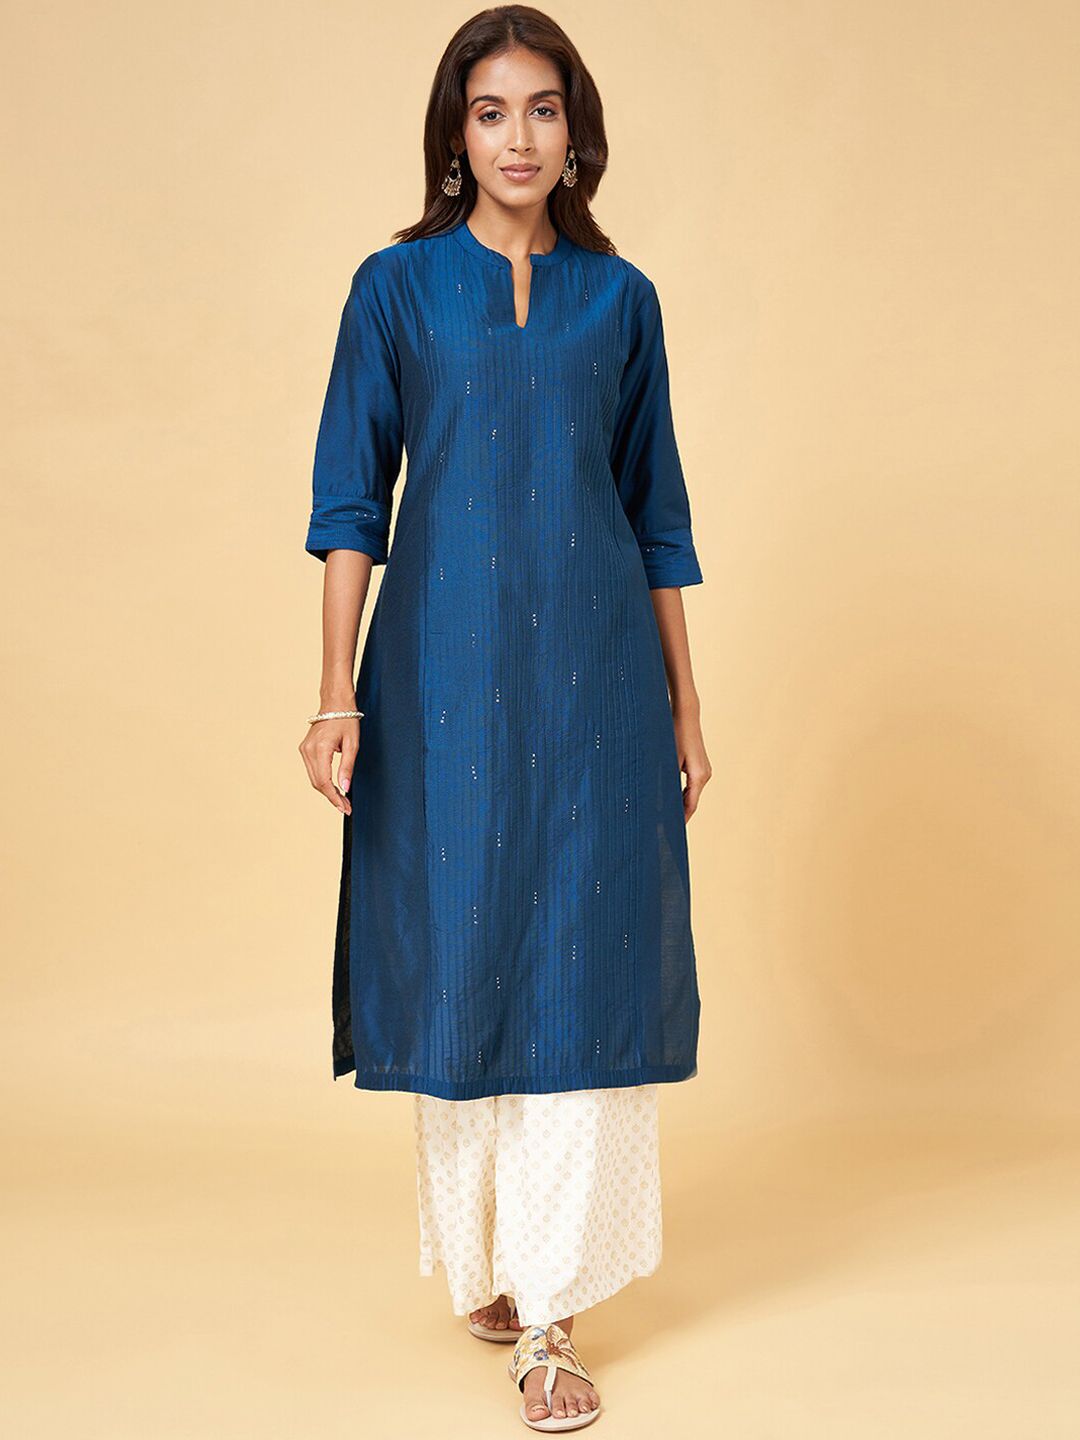 RANGMANCH BY PANTALOONS Embellished Sequined Mandarin Collar Thread Work  A-Line Kurta Price in India, Full Specifications & Offers